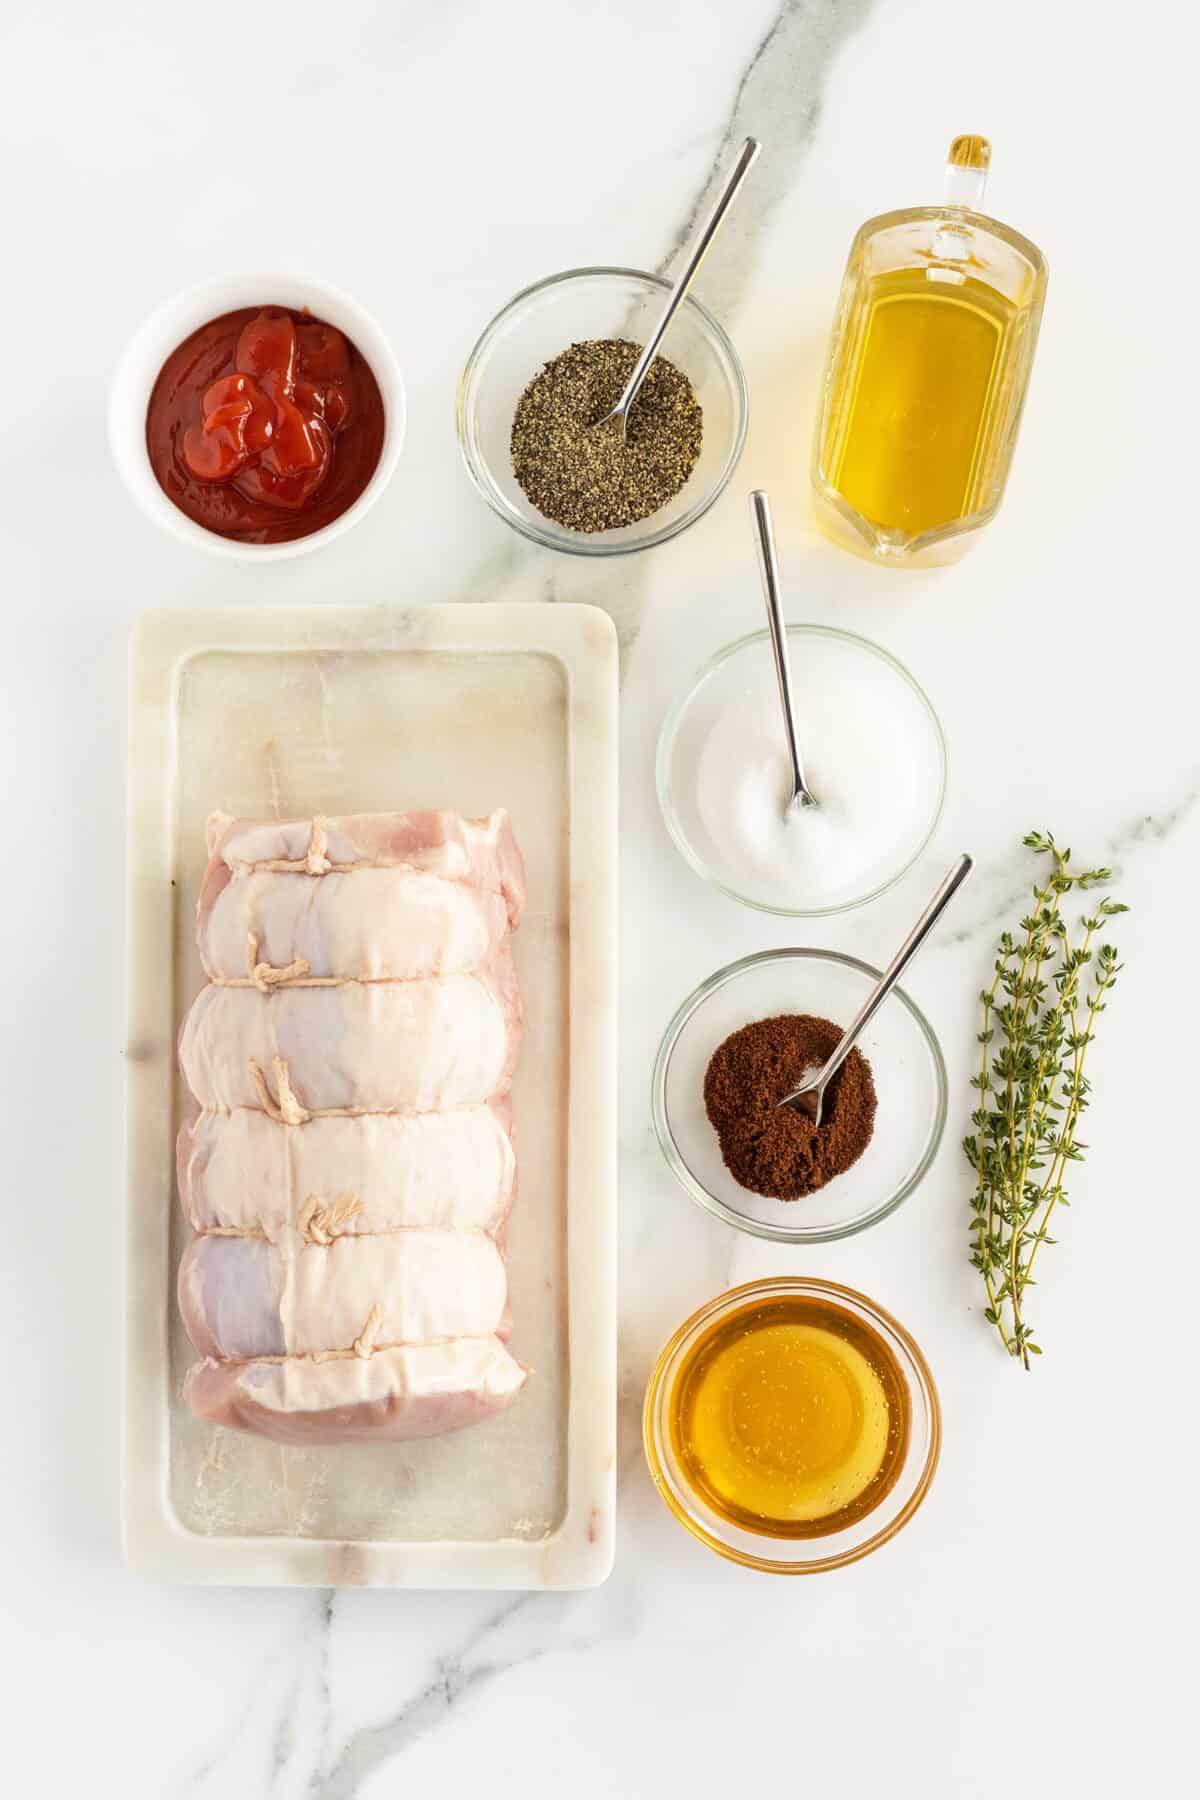 Grilled pork loin ingredients in small clear bowls